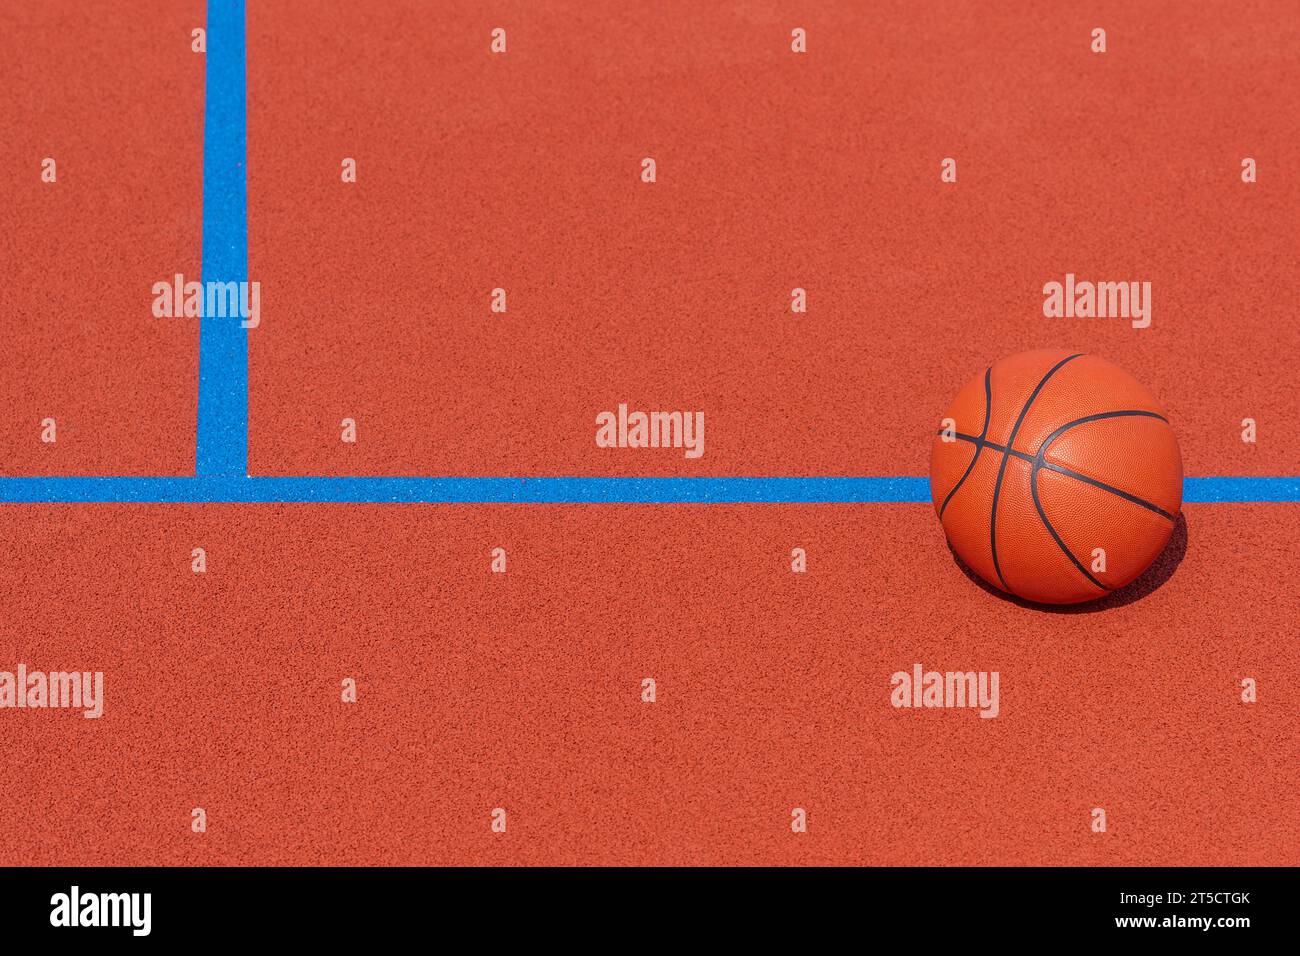 New orange basketball with blue line on orange court of gymnasium sport floor. Horizontal sport theme poster, greeting cards, headers, website and app Stock Photo